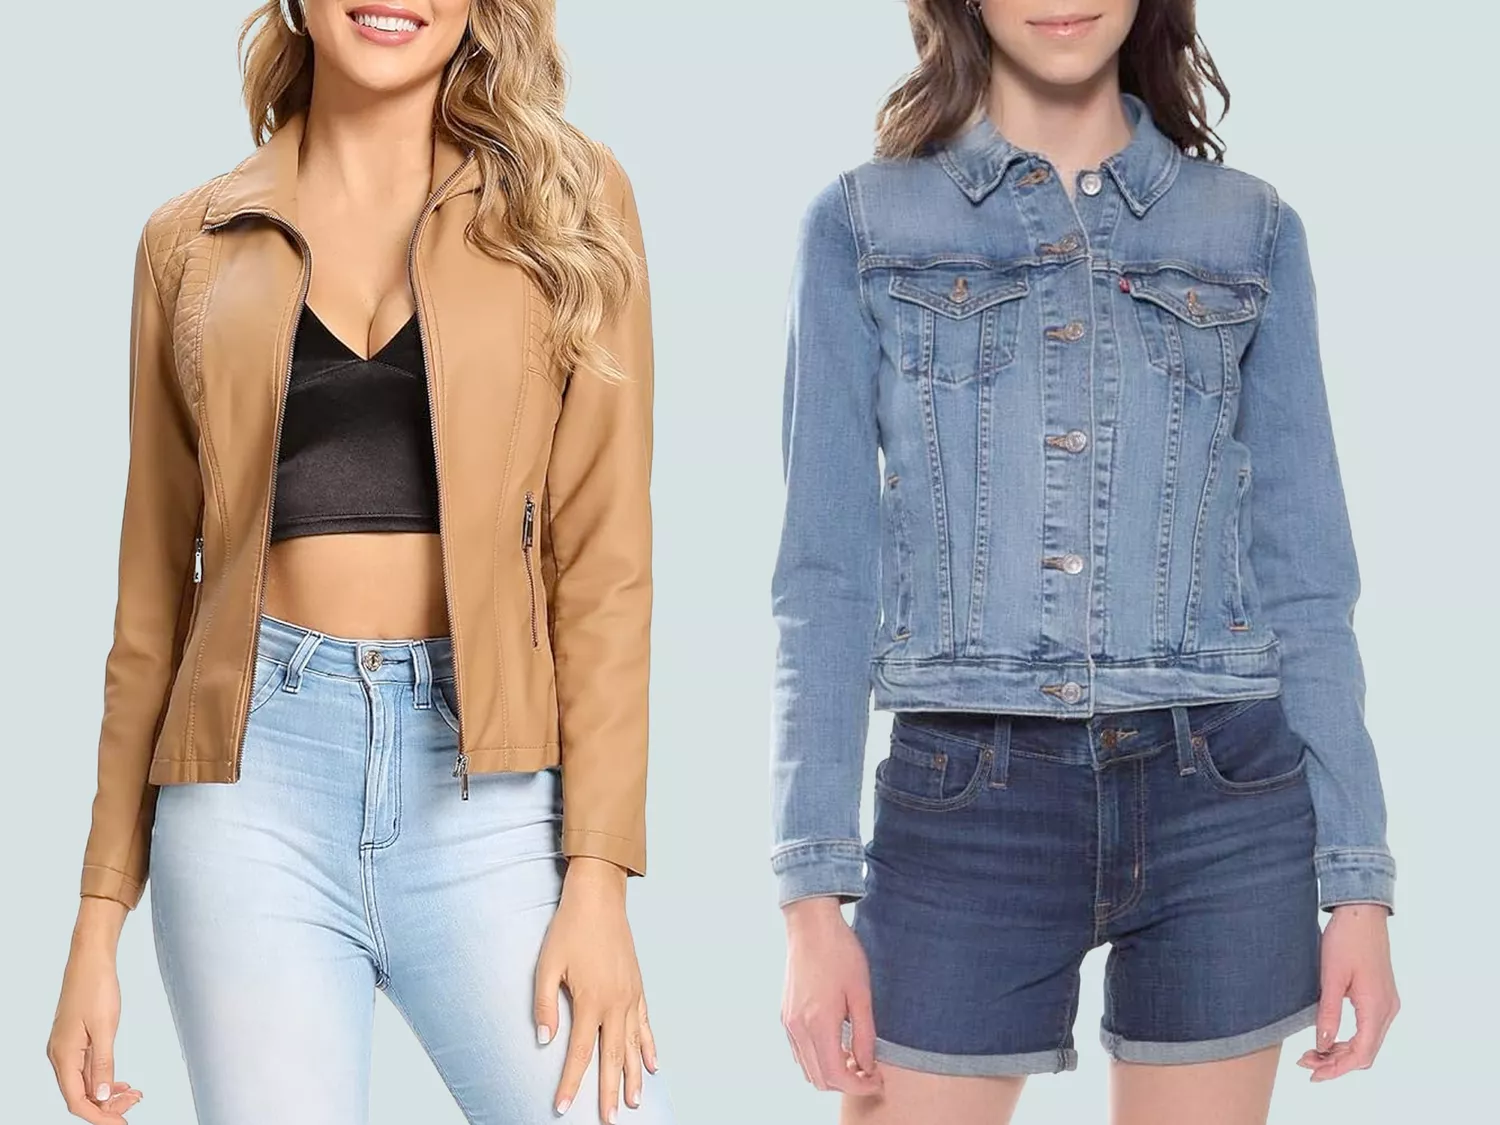 Amazon’s 7 Best Transitional Spring Jackets Under $50 Include a 60%-Off Levi’s Style